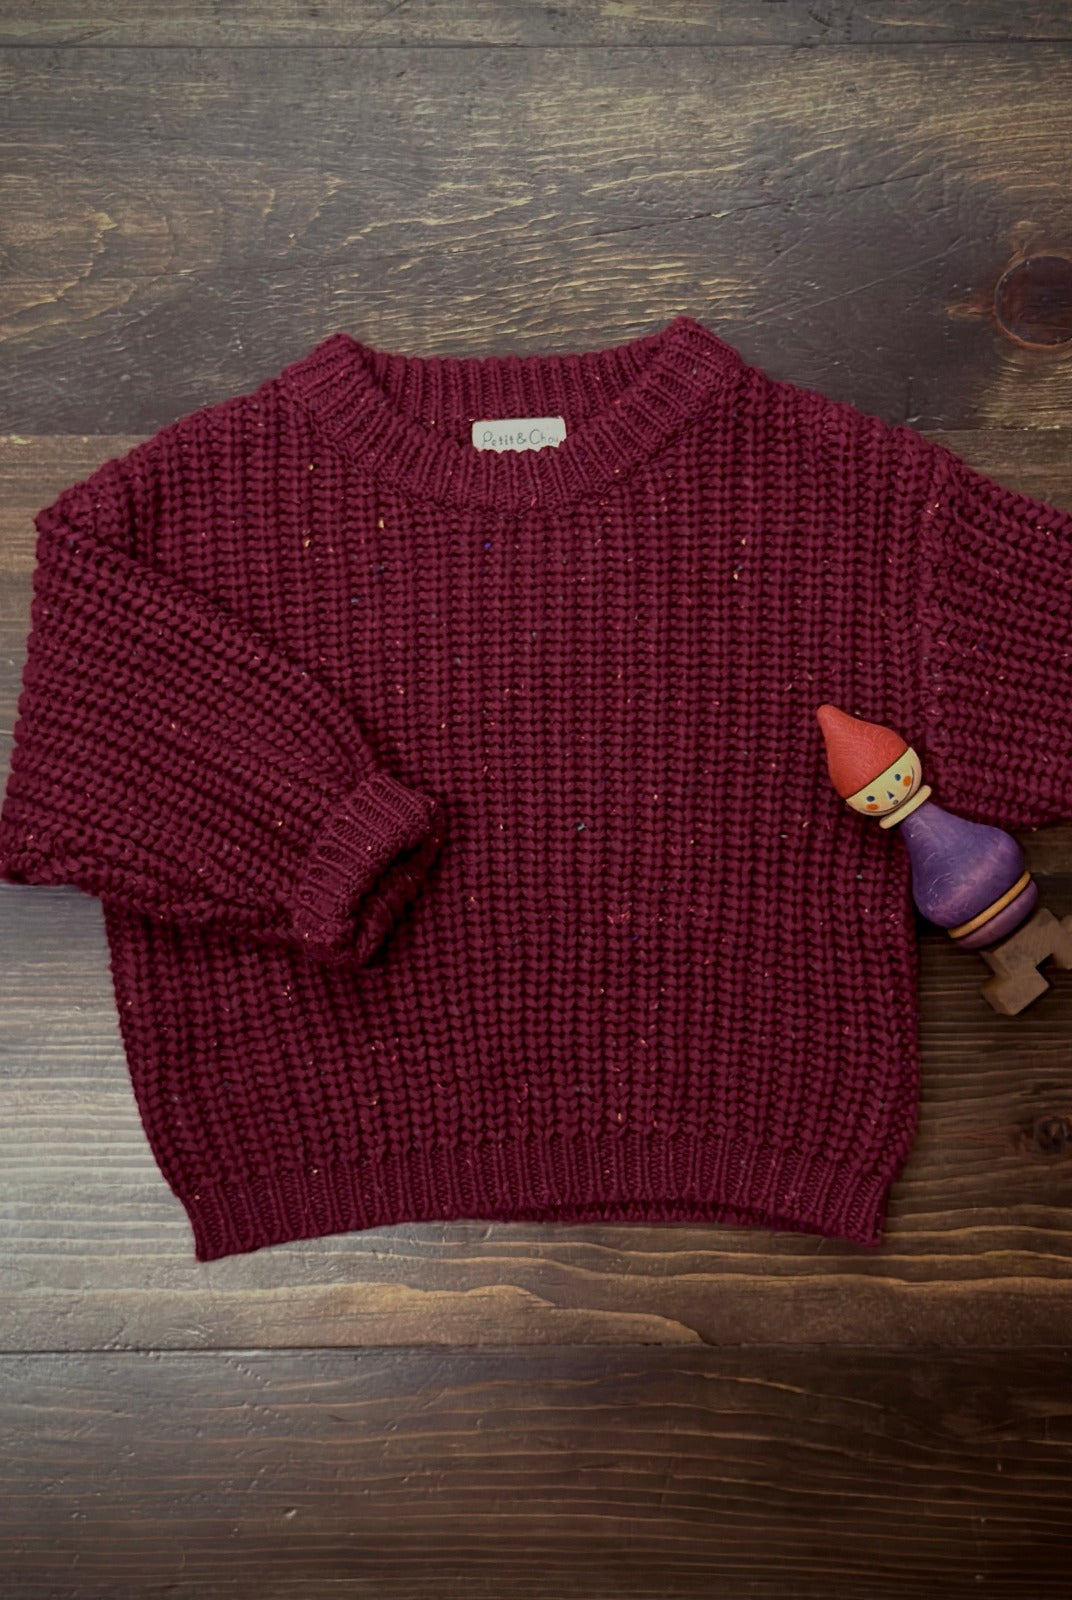 Toddler chunky sweater